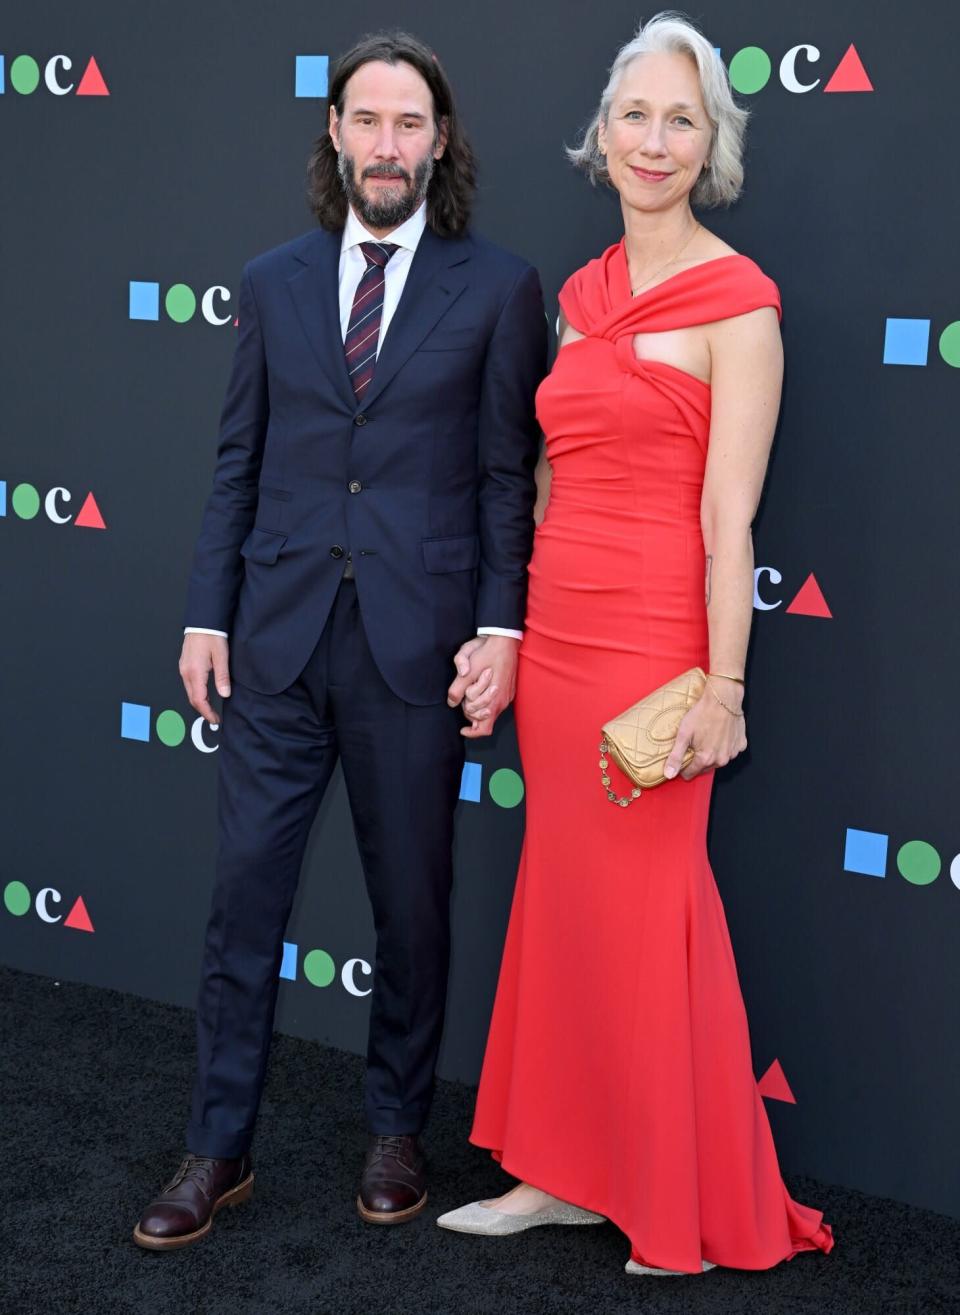 LOS ANGELES, CALIFORNIA - JUNE 04: Keanu Reeves and Alexandra Grant attend the 2022 MOCA Gala at The Geffen Contemporary at MOCA on June 04, 2022 in Los Angeles, California.  (Photo by Axelle/Bauer-Griffin/FilmMagic)